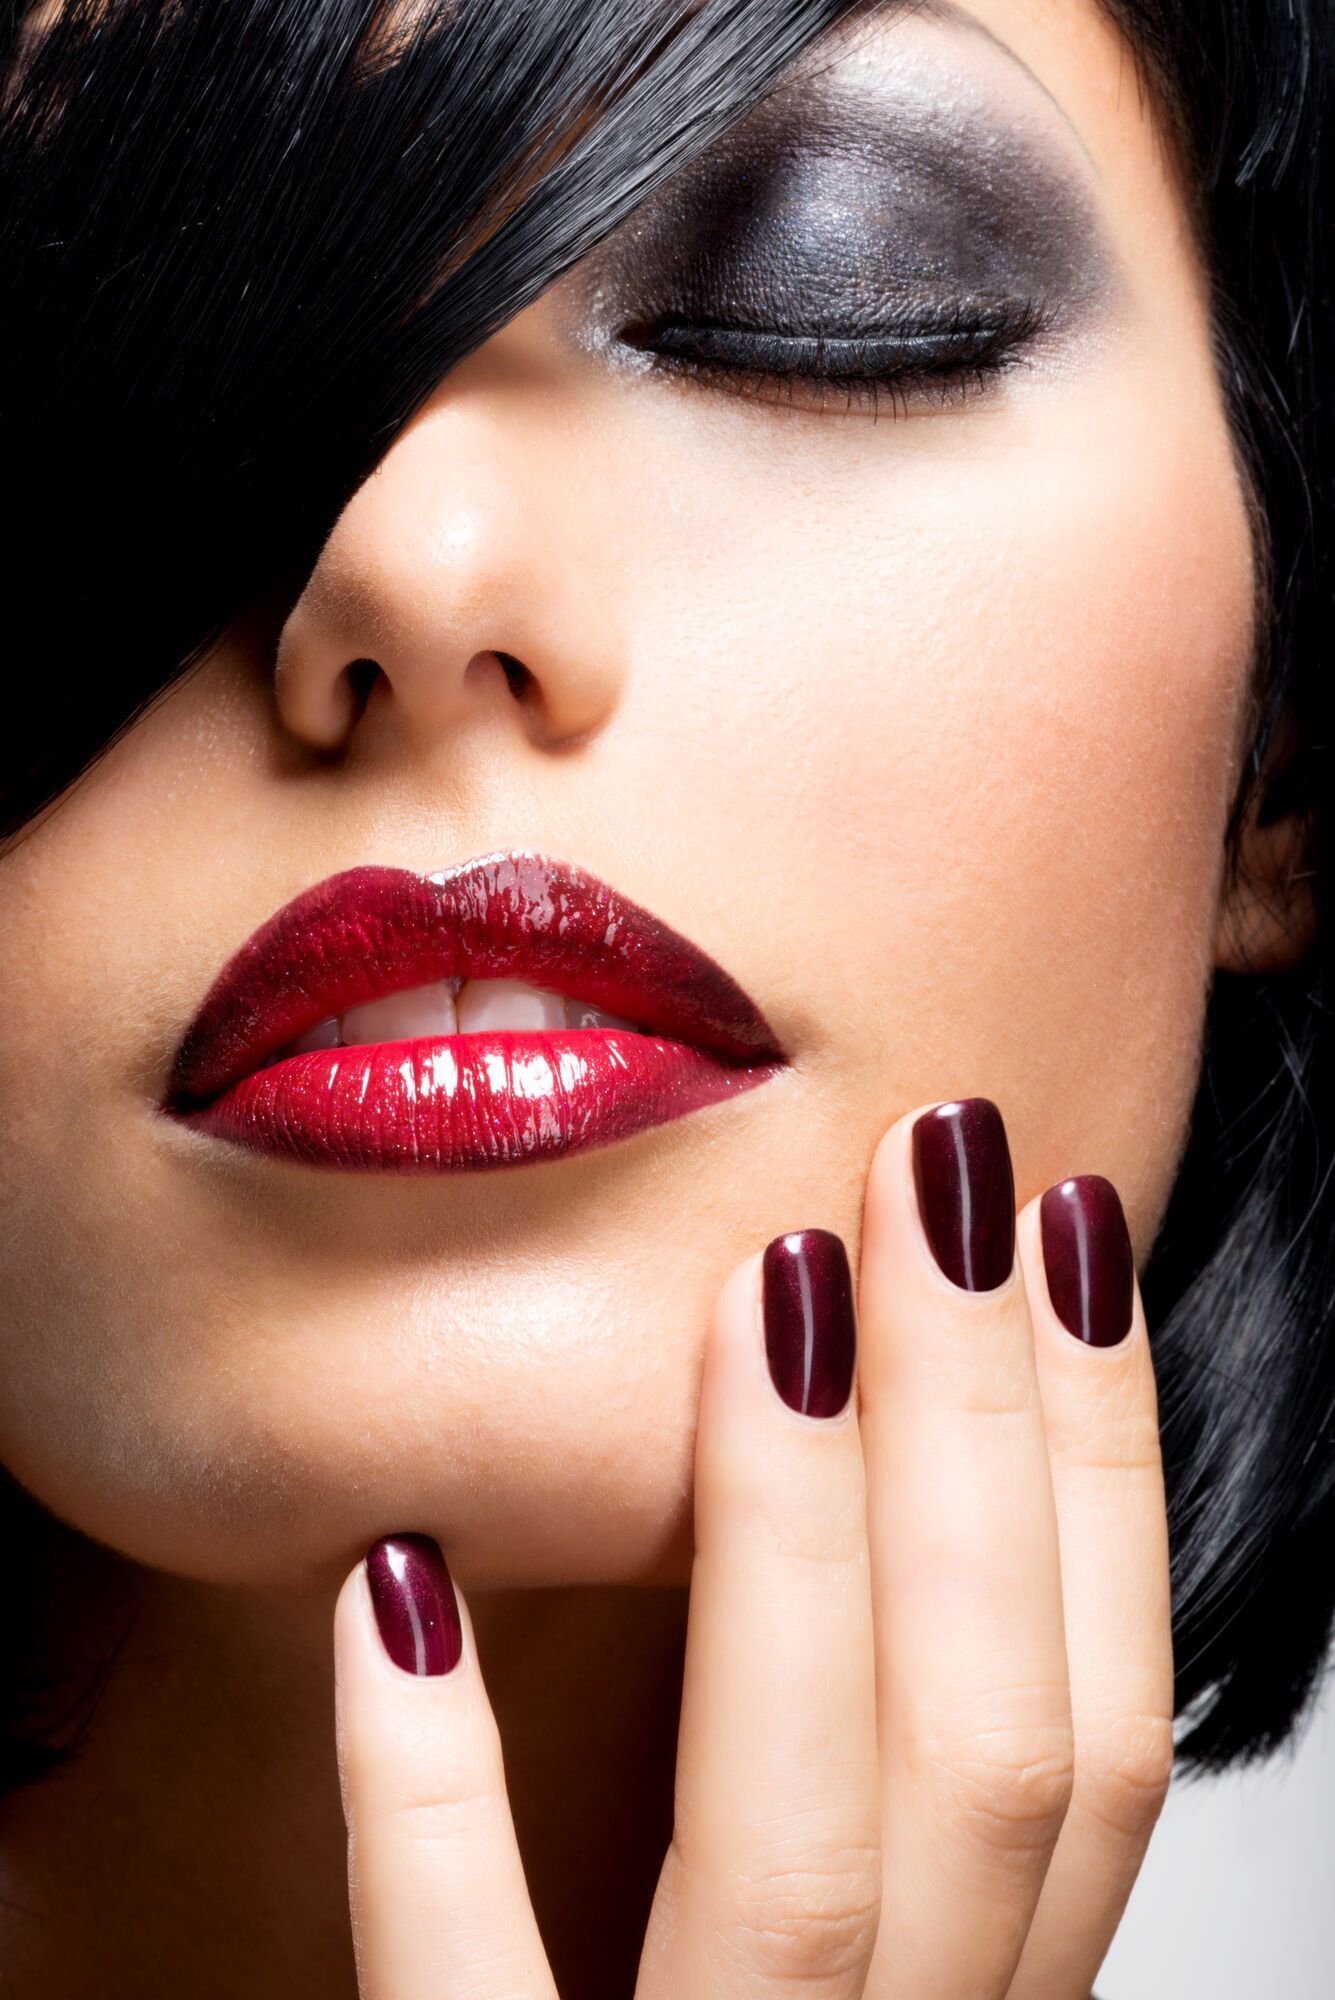 Manicure for a million dollars: these 5 nail polishes will always look expensive